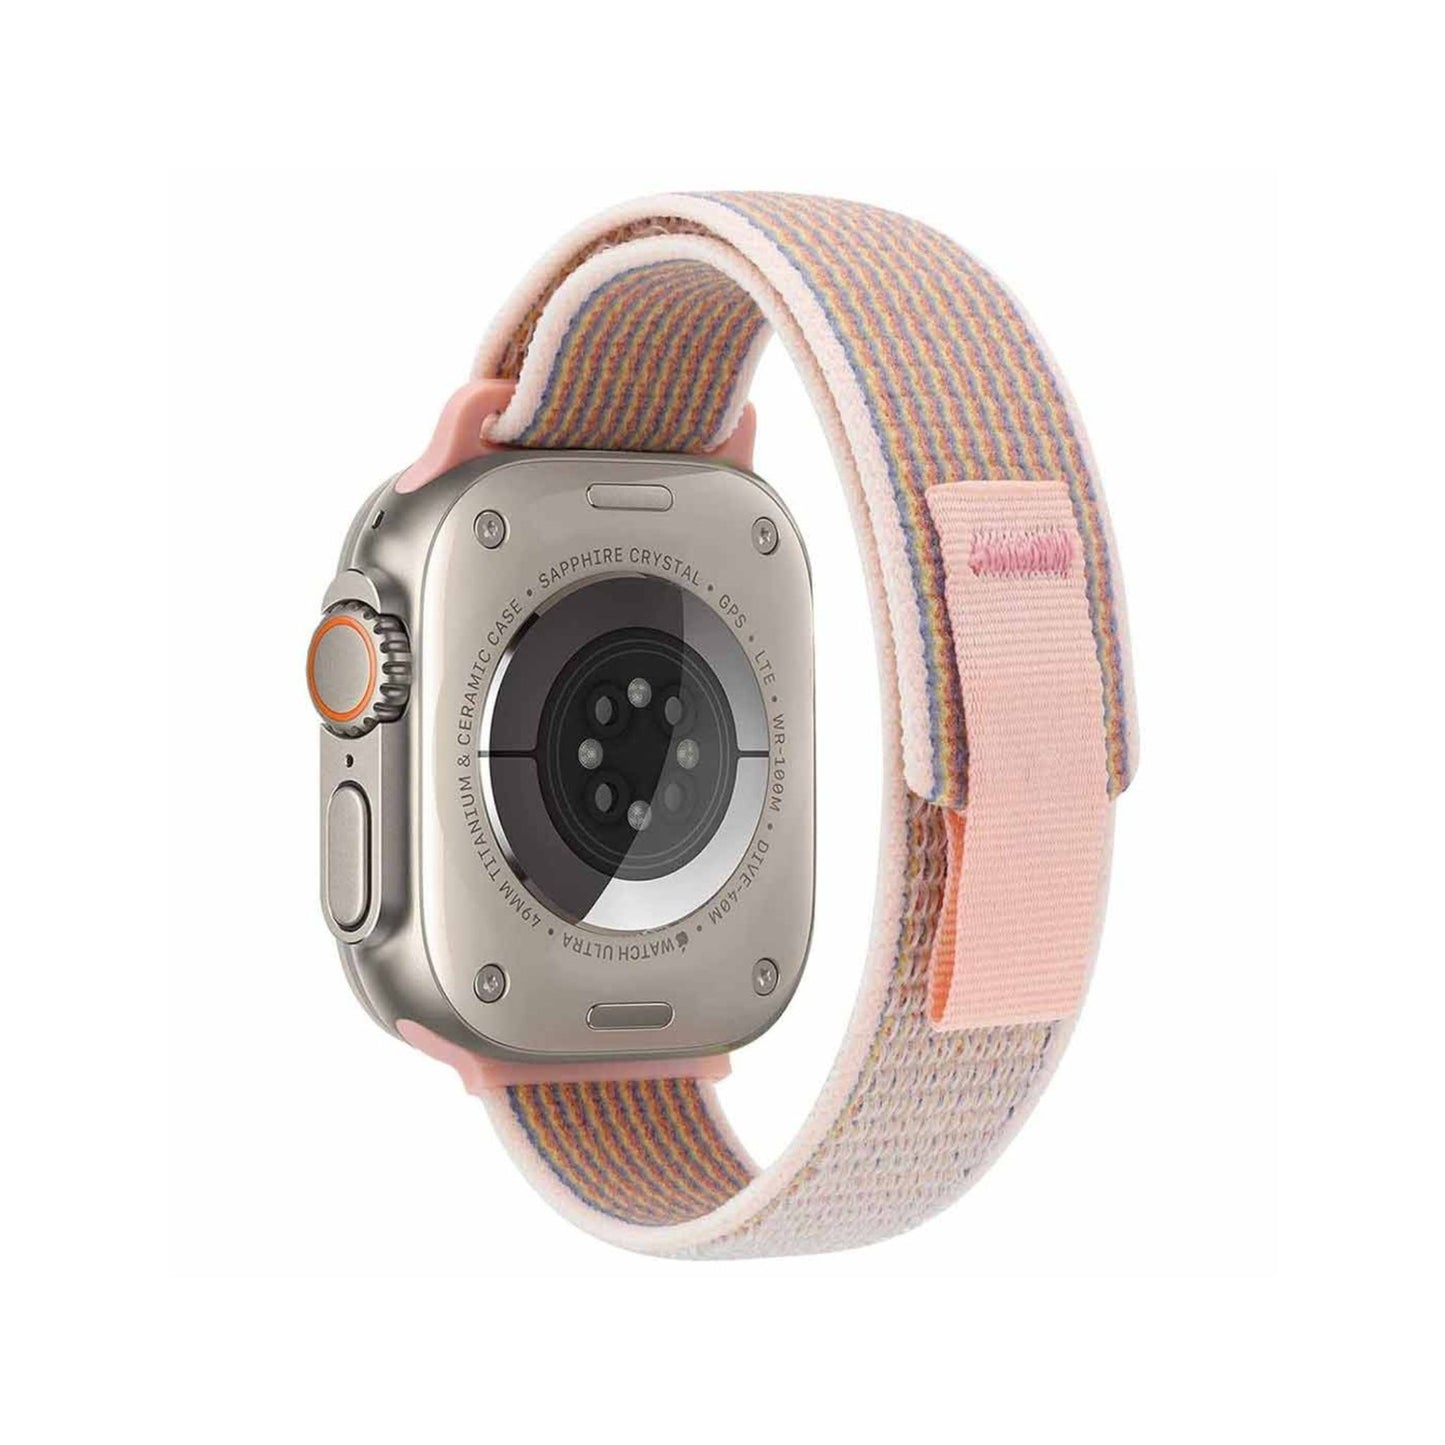 Green Lion Trail Loop Strap For iWatch_Pink